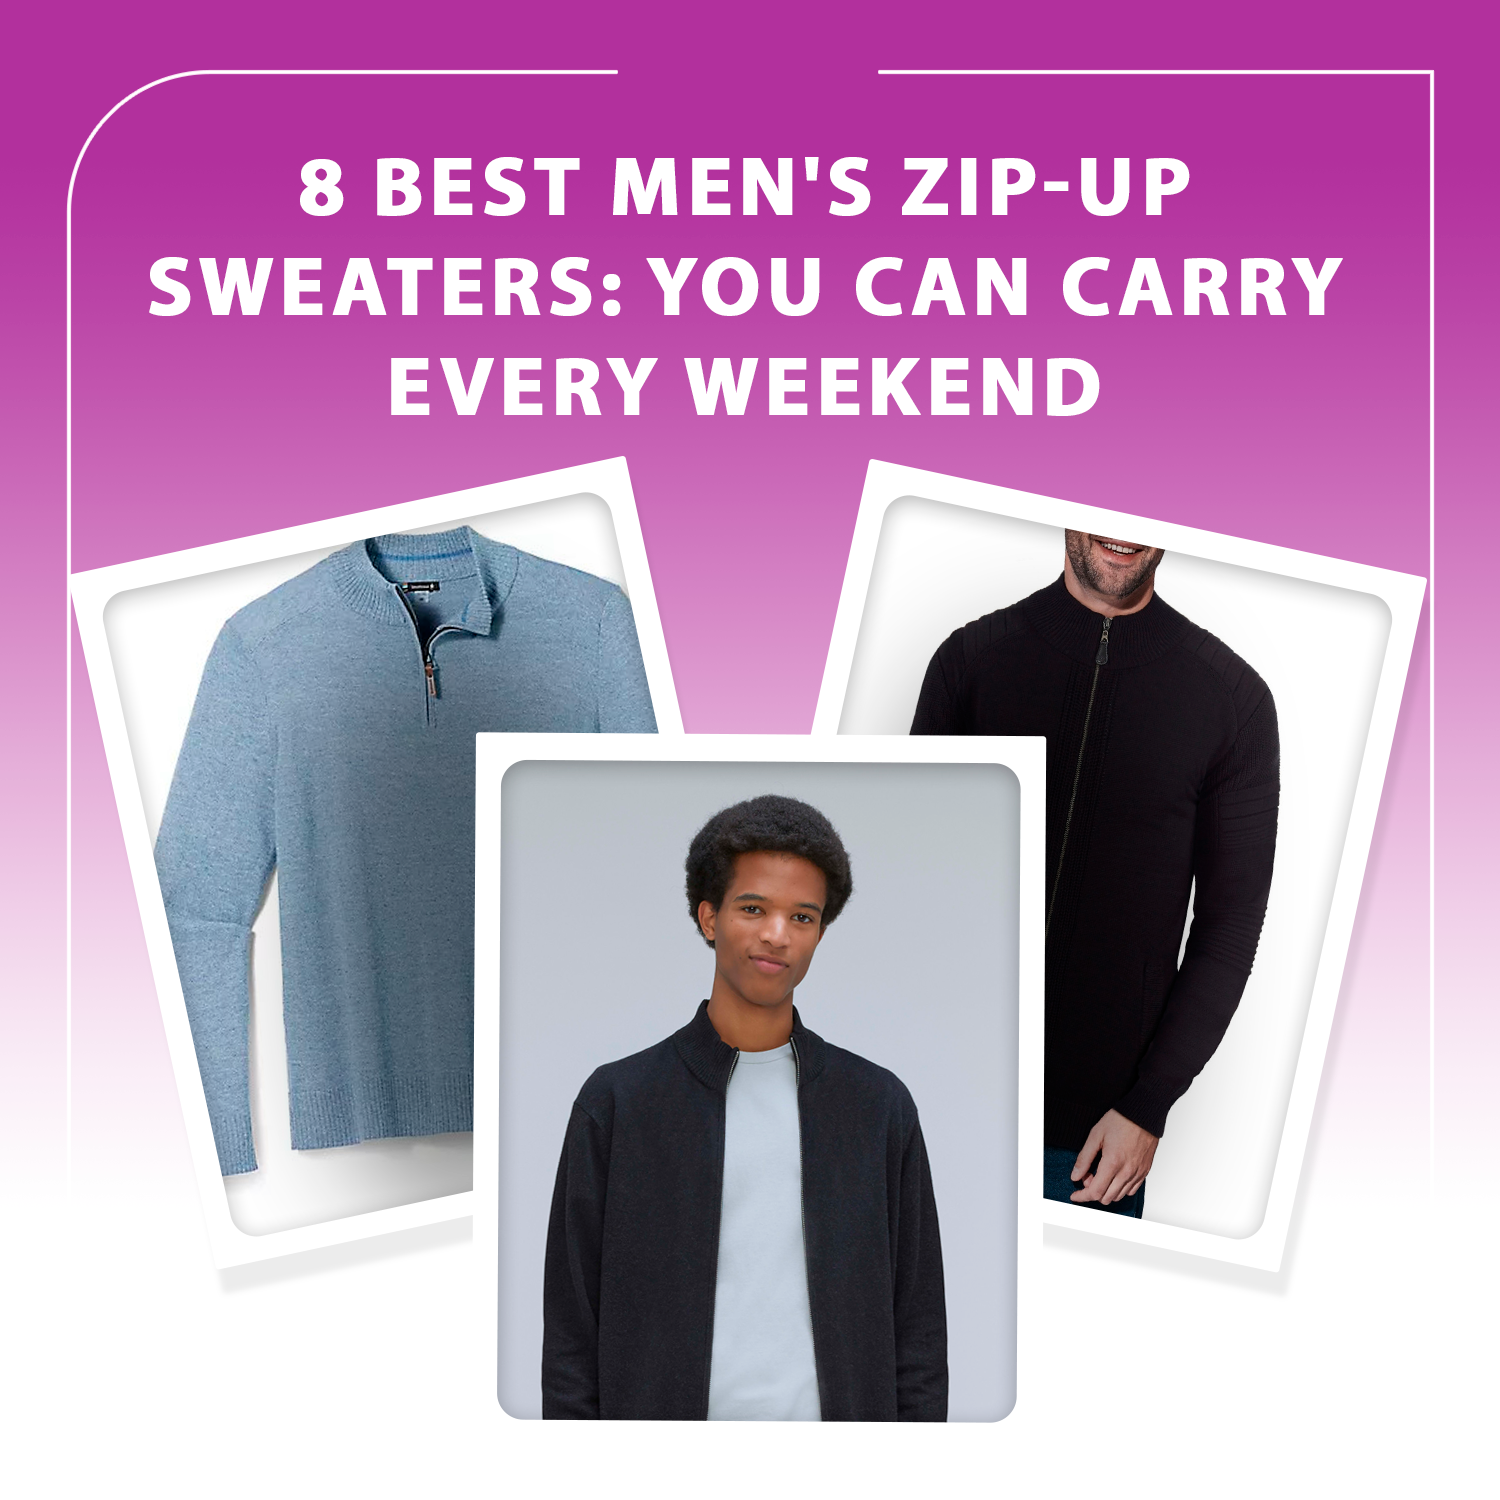 8 Best Men’s Zip-Up Sweaters: You Can Carry Every Weekend